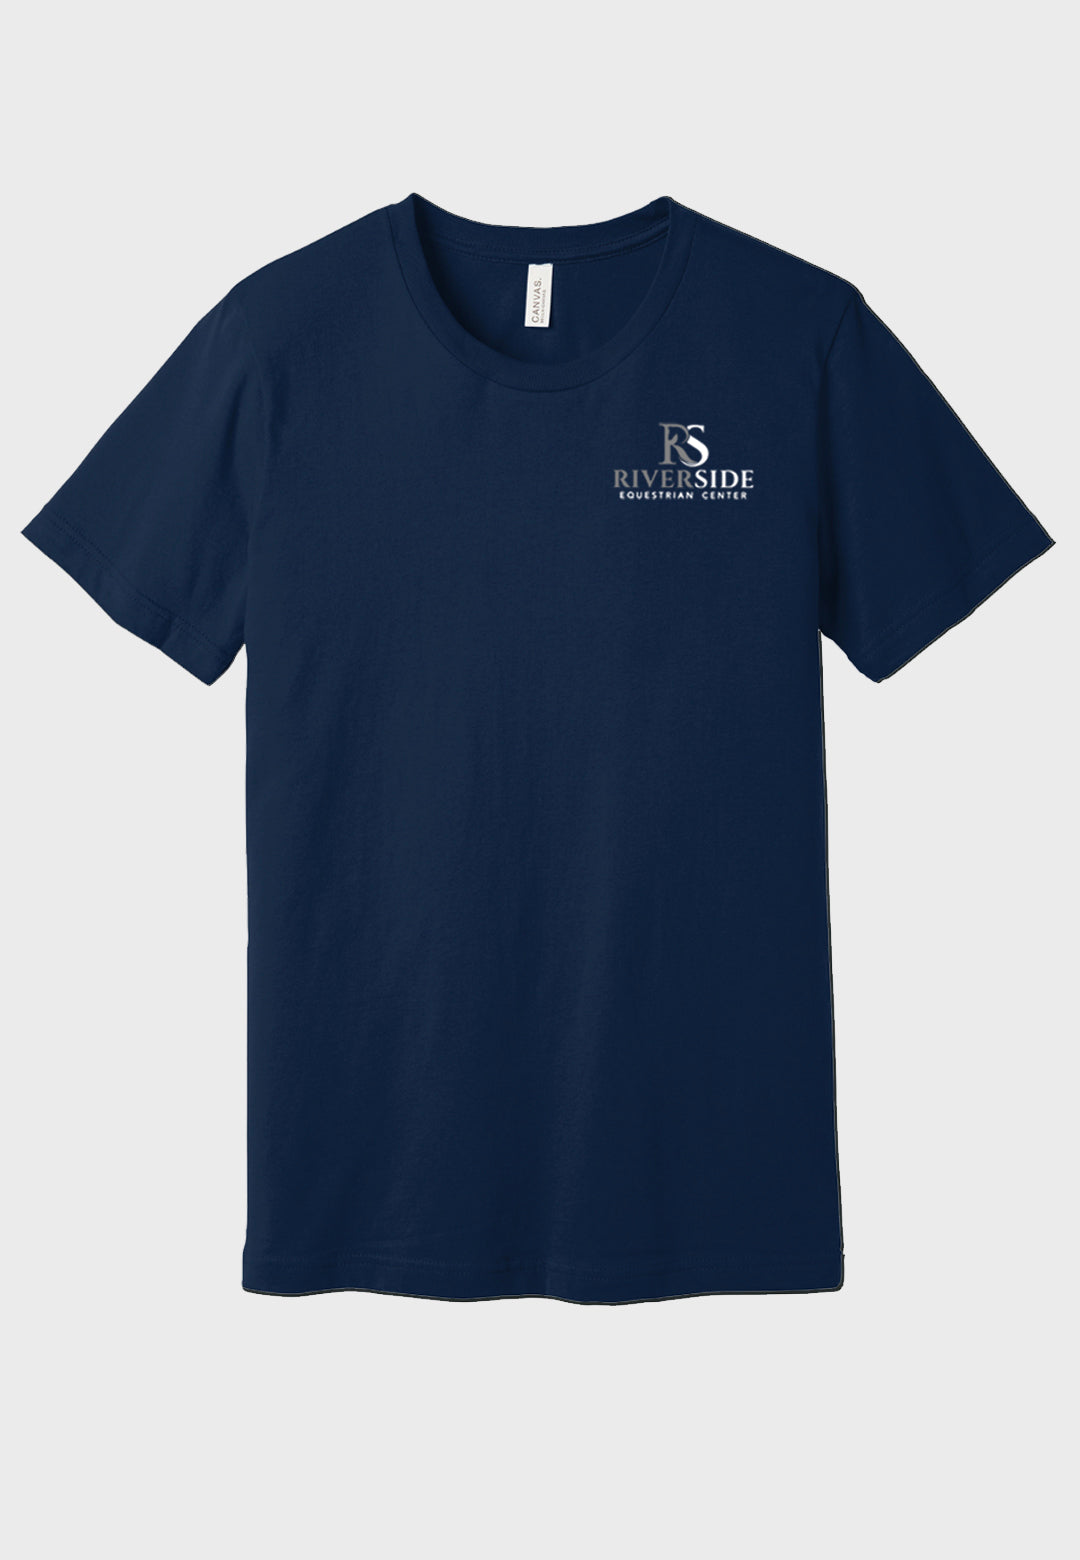 Riverside Equestrian Center BELLA+CANVAS ® Unisex Jersey Short Sleeve Tee - Adult/Youth Sizes, 3 Color Options